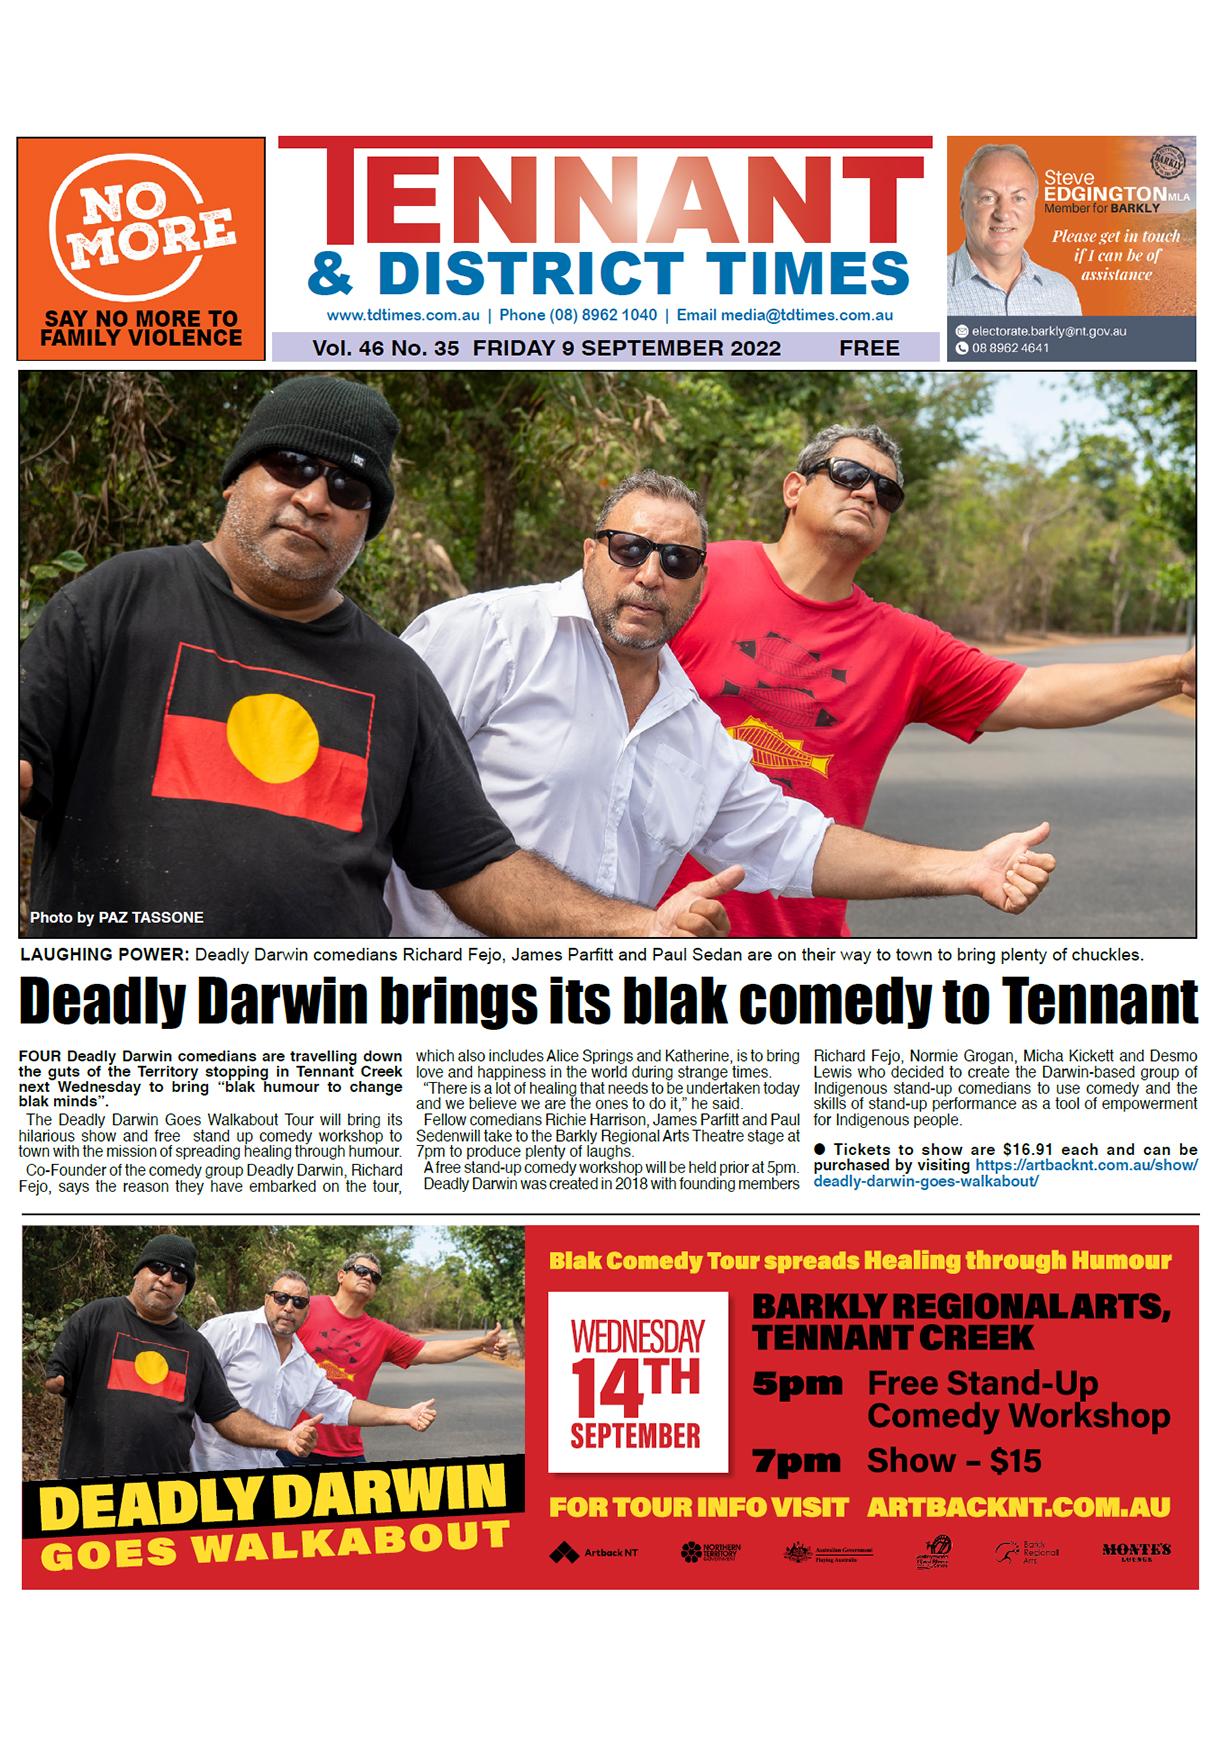 Tennant & District Times 9 September 2022